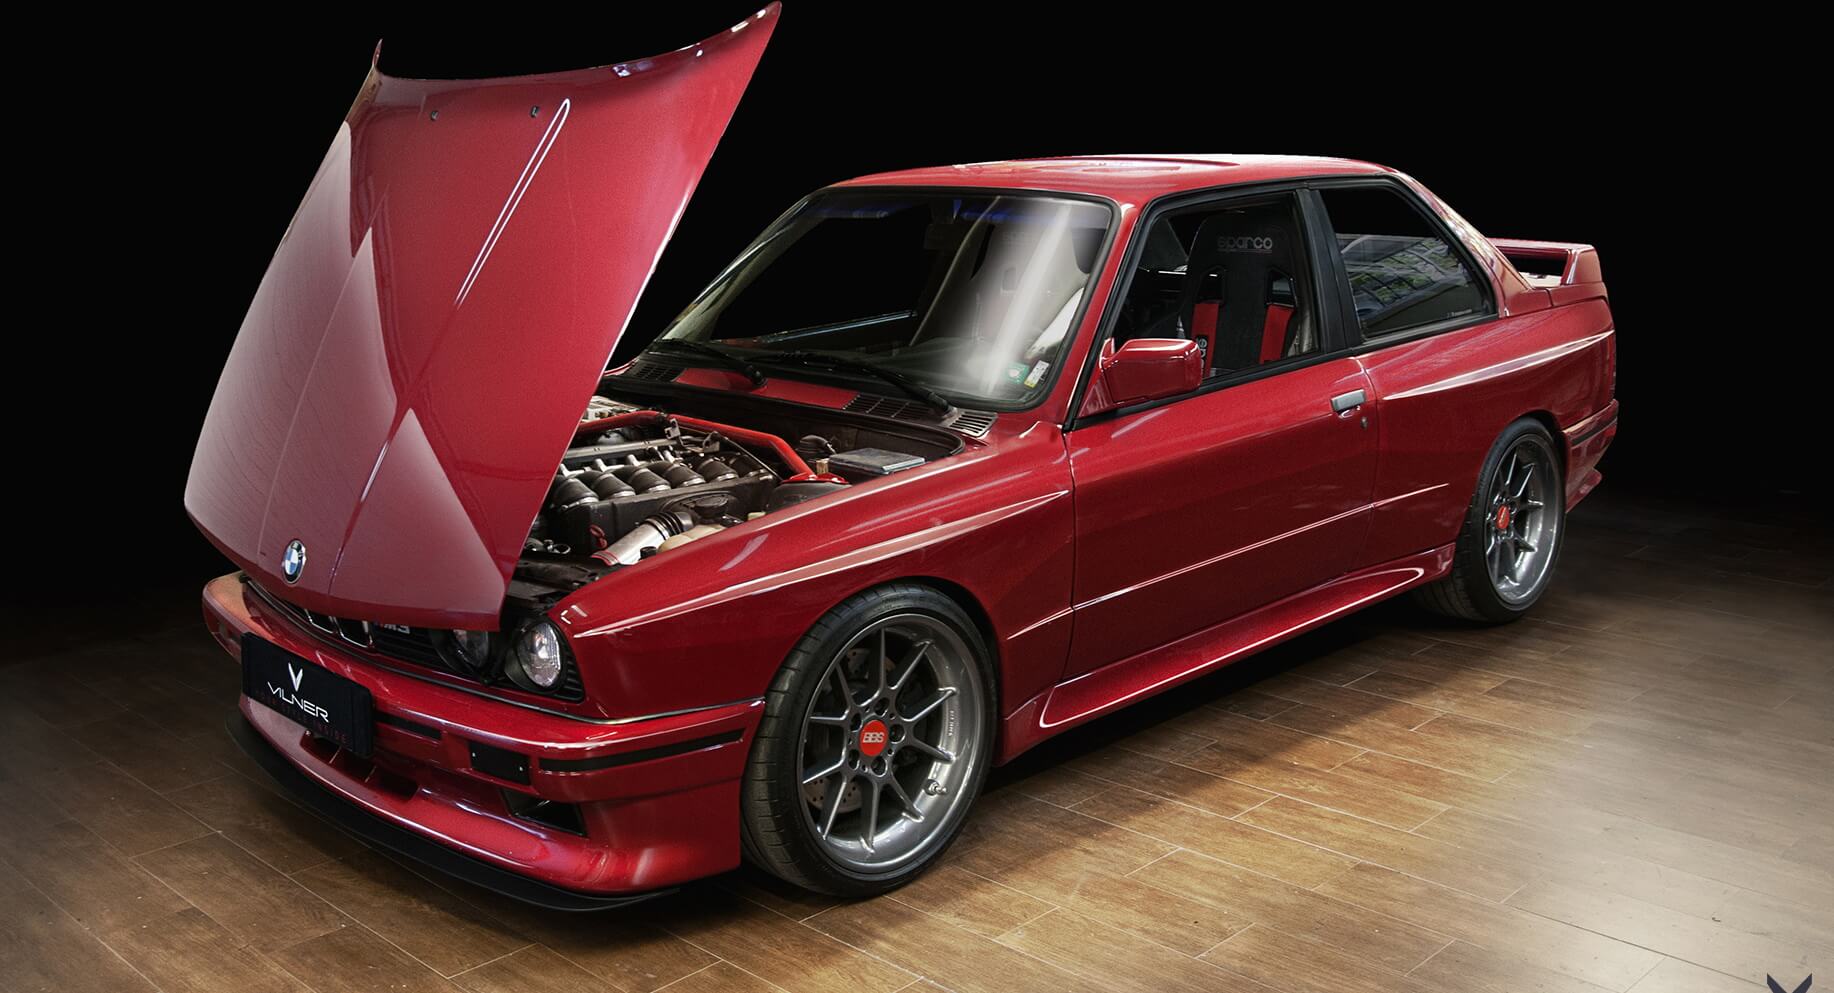 BMW M3 Evo E30 Is One Of Vilner's Finest Projects | Carscoops